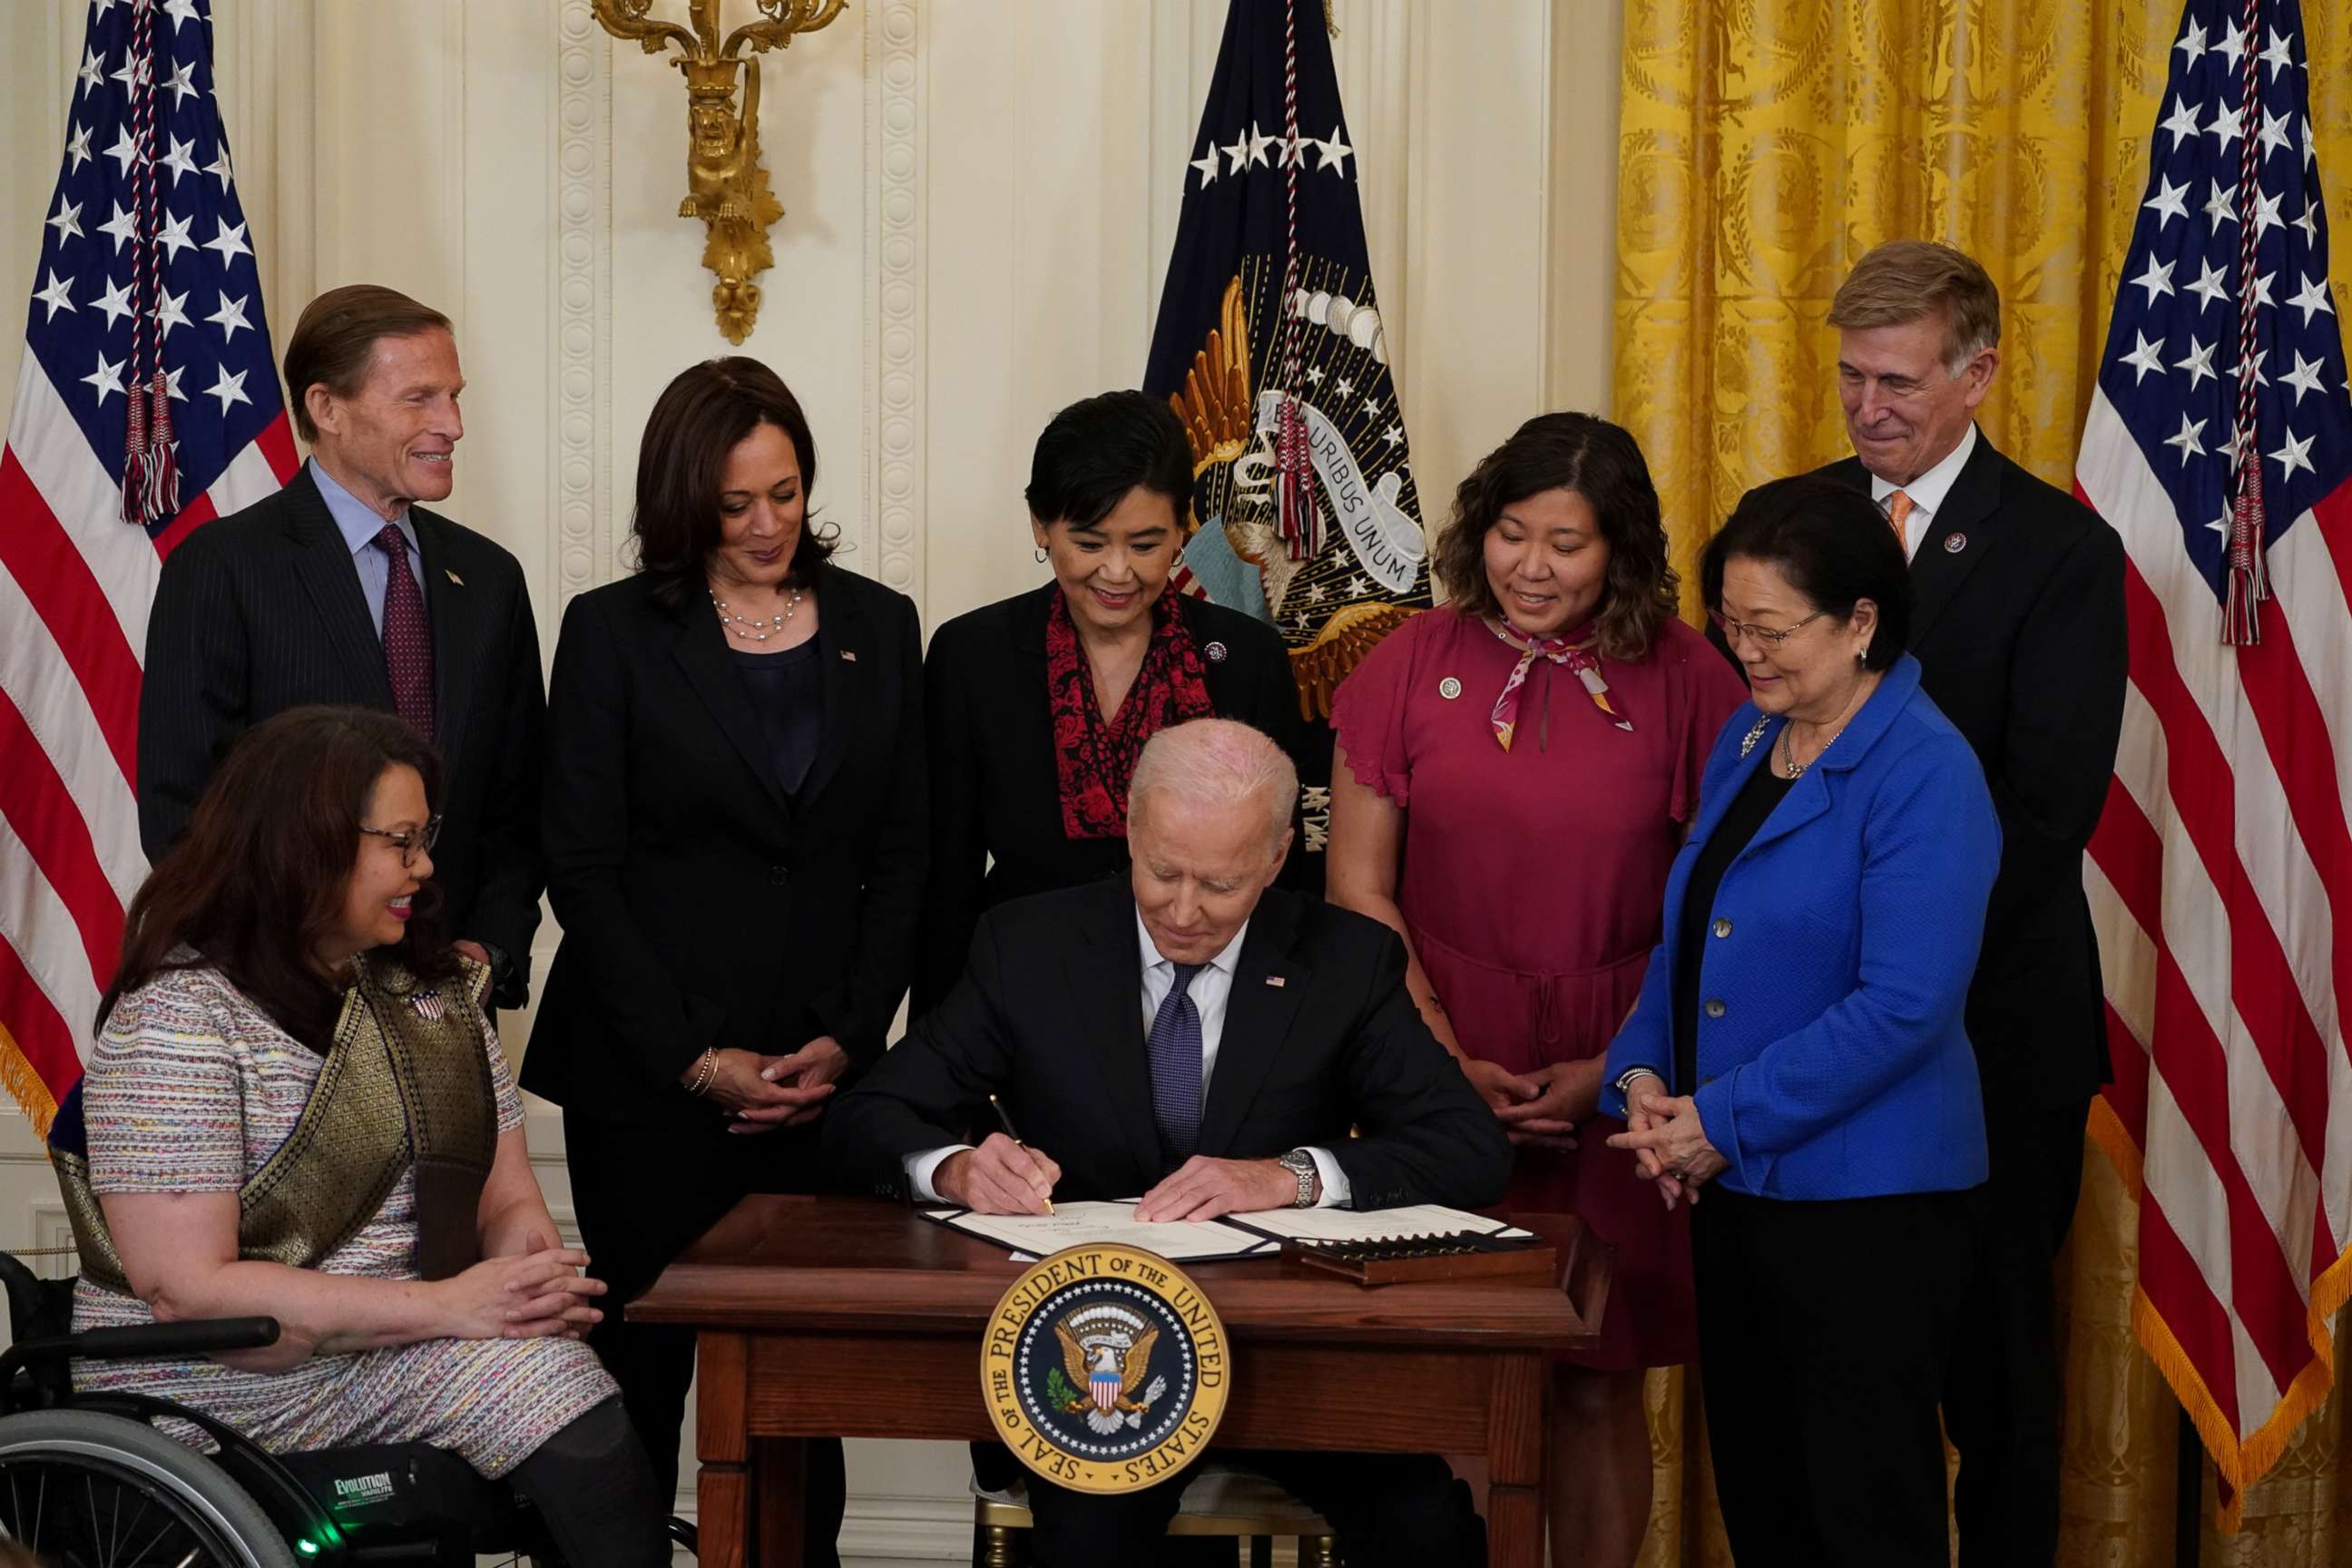 PHOTO: President Joe Biden signs the COVID-19 Hate Crimes Act into law during a ceremony in the East Room at the White House in Washington, D.C., May 20, 2021.